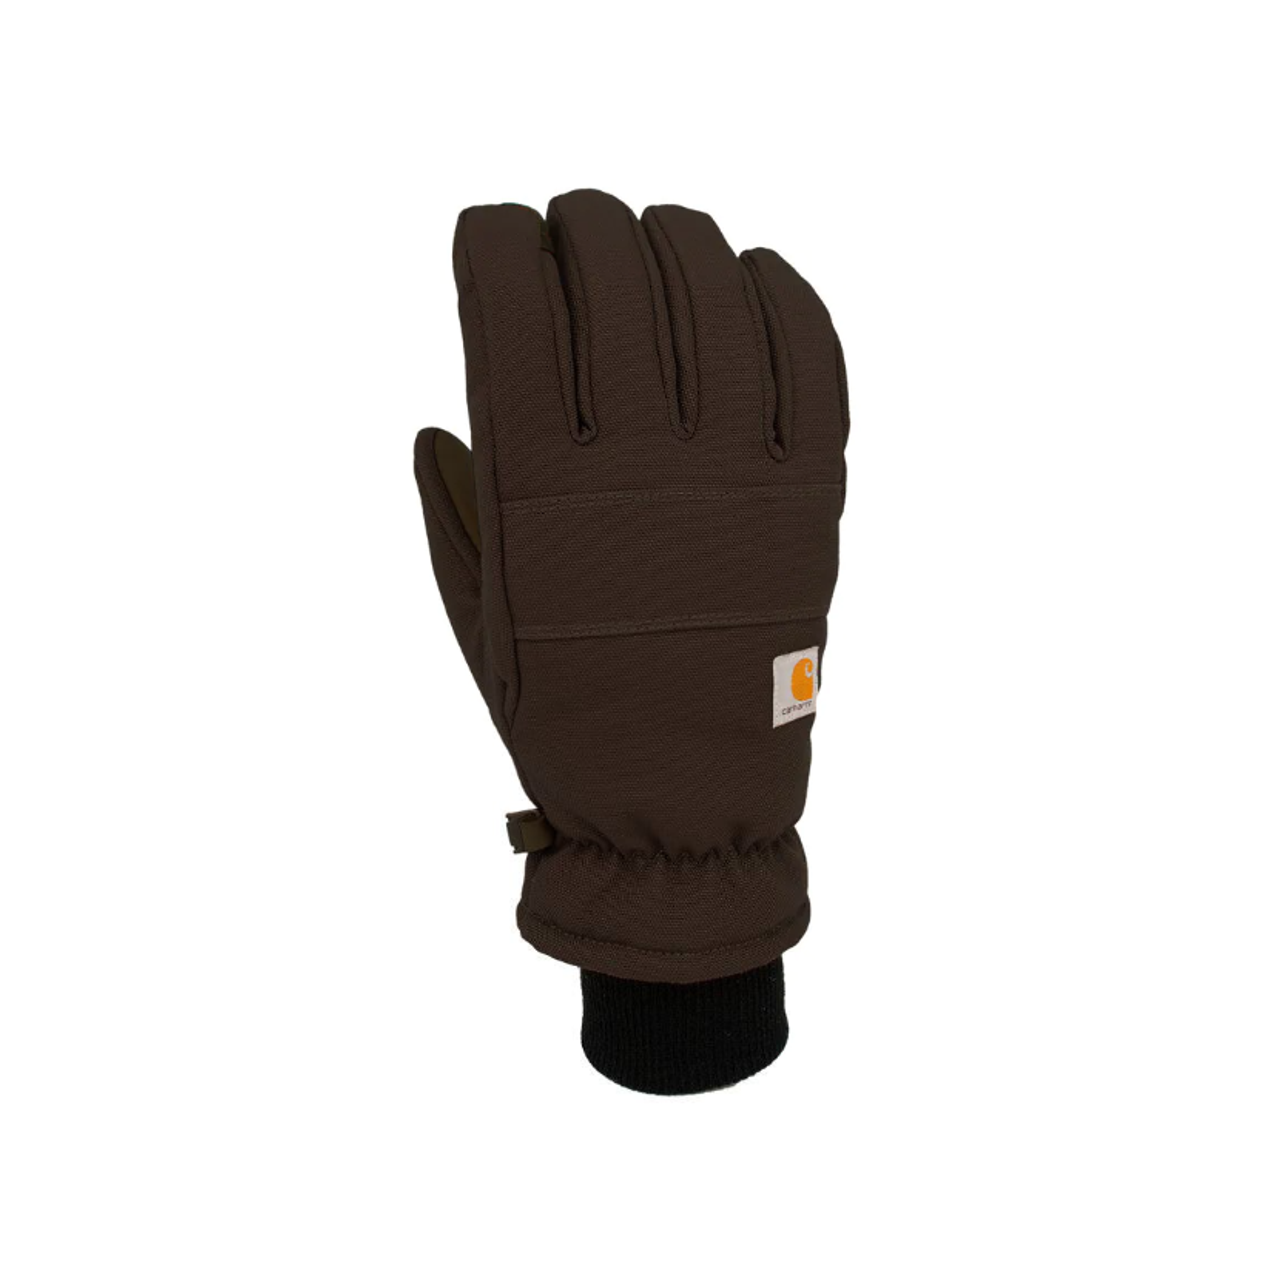 Carhartt Woman's Insulated Duck/Synthetic Leather Knit Cuff Glove in BLACK